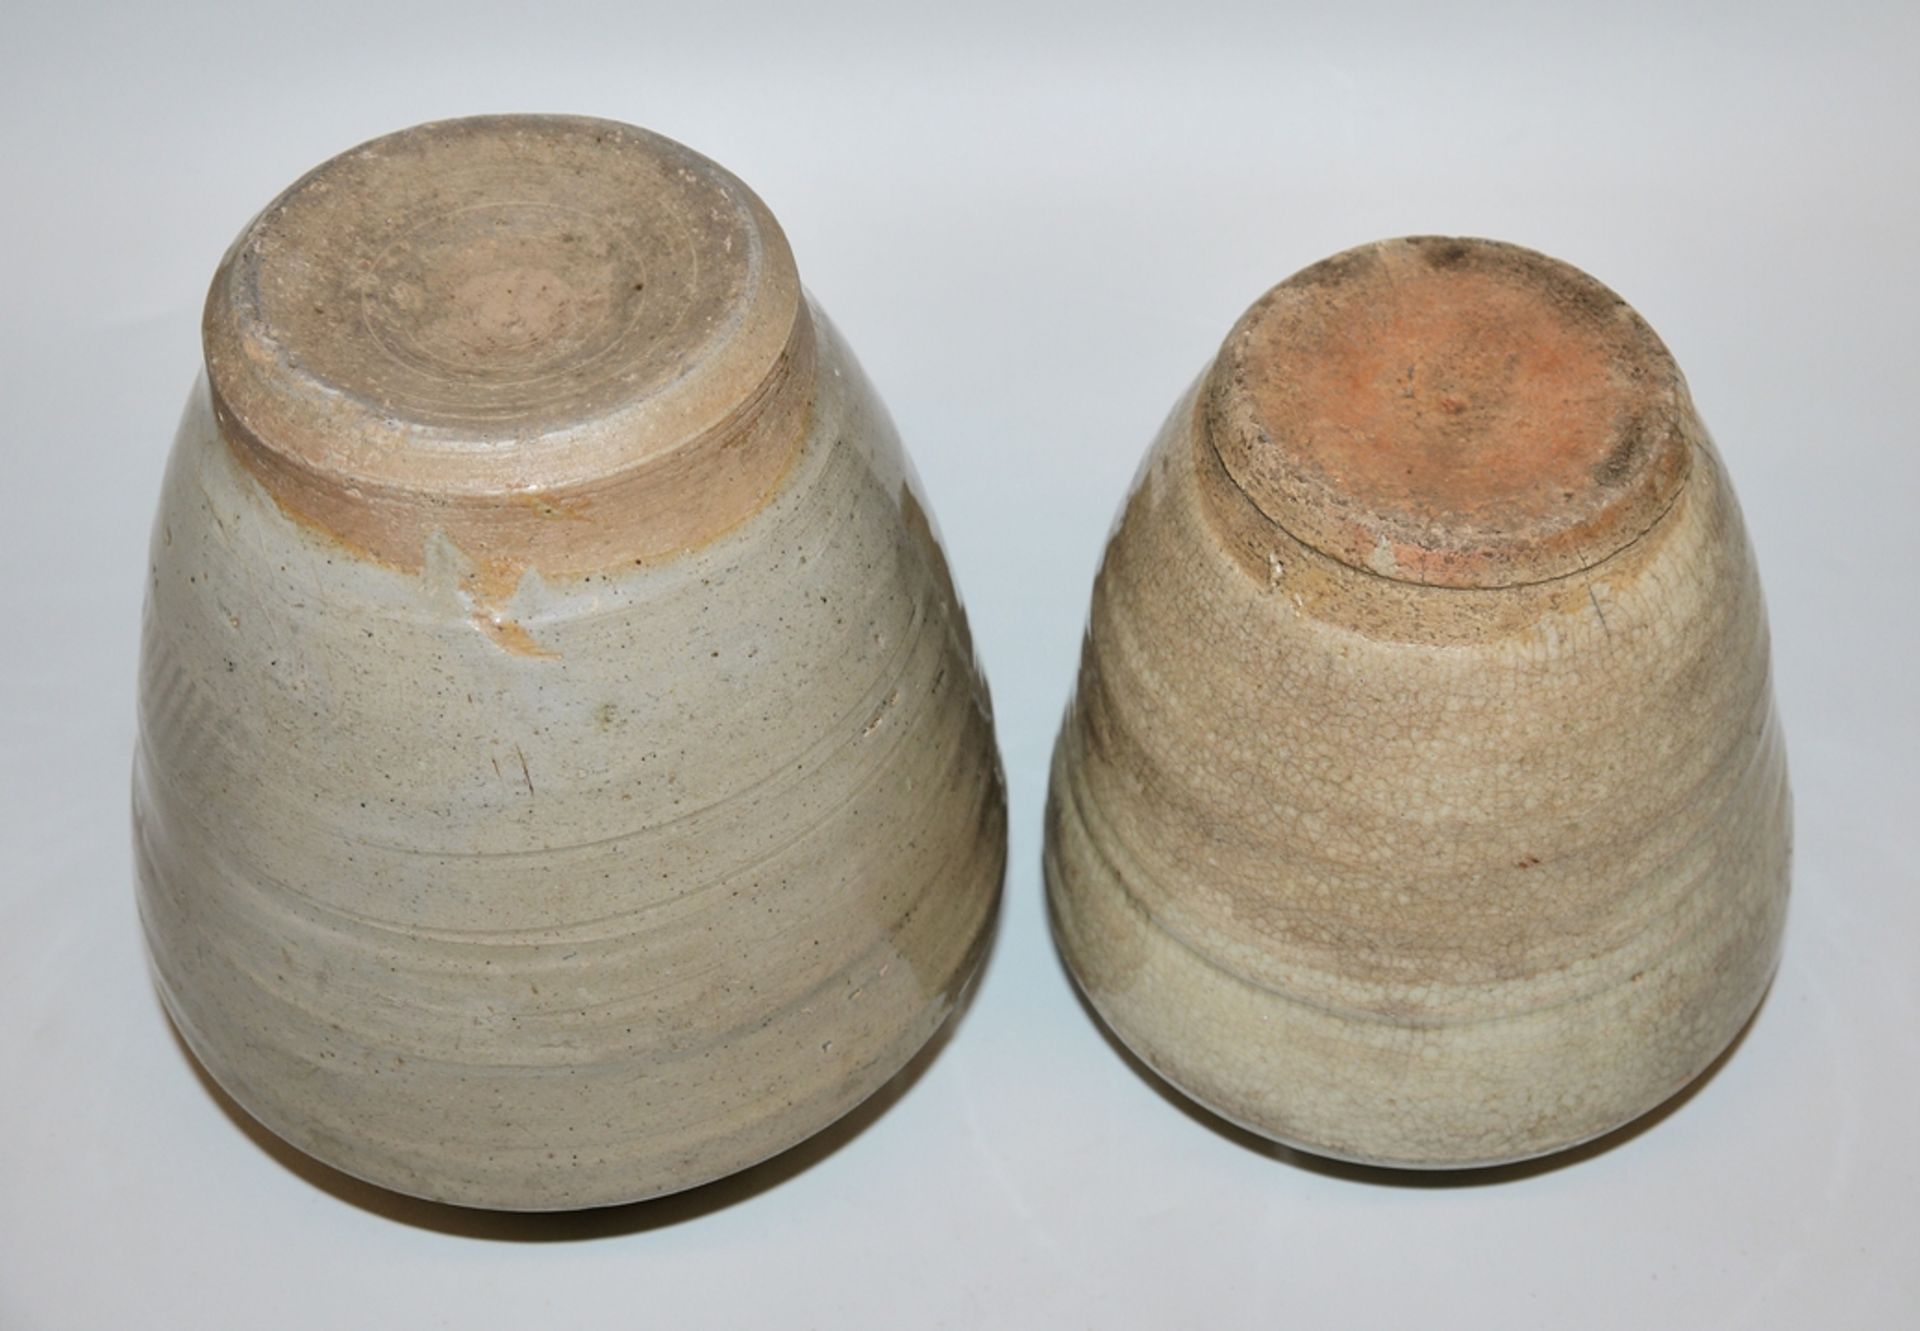 Two celadon storage jars, Ming period, probably southern China 16th/17th century - Image 2 of 2